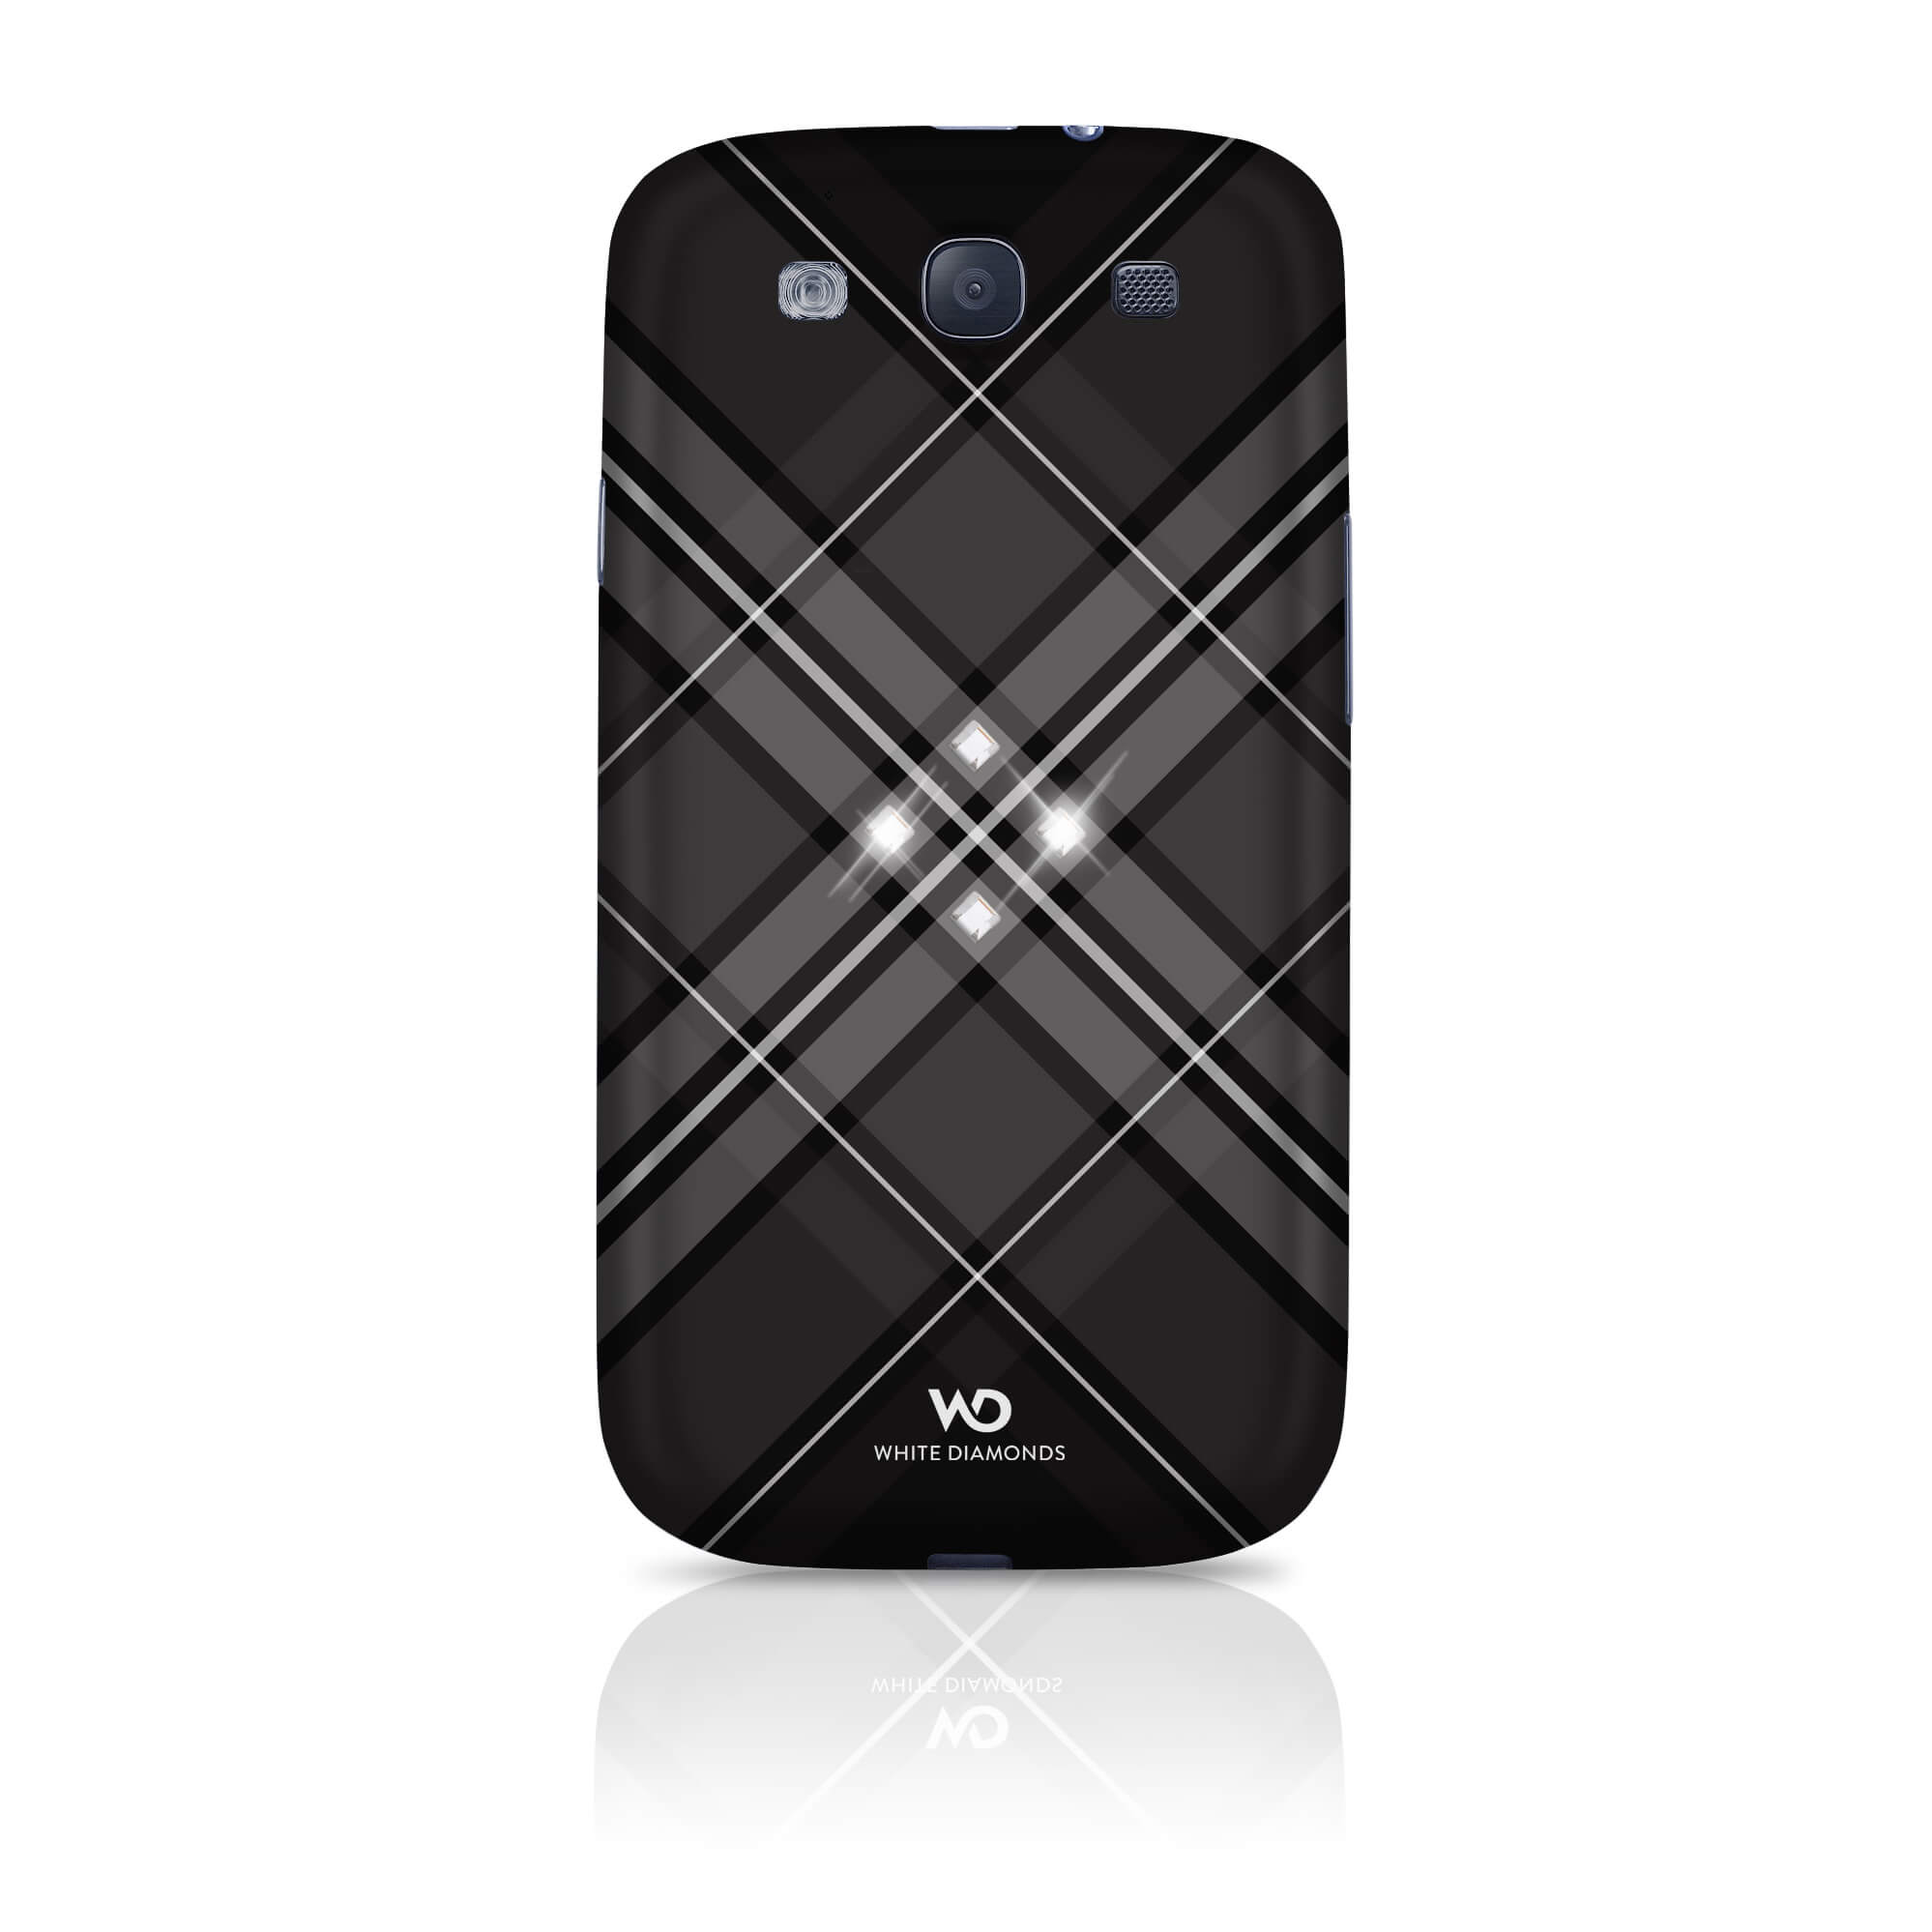 Grid Mobile Phone Cover for S amsung Galaxy S III, black